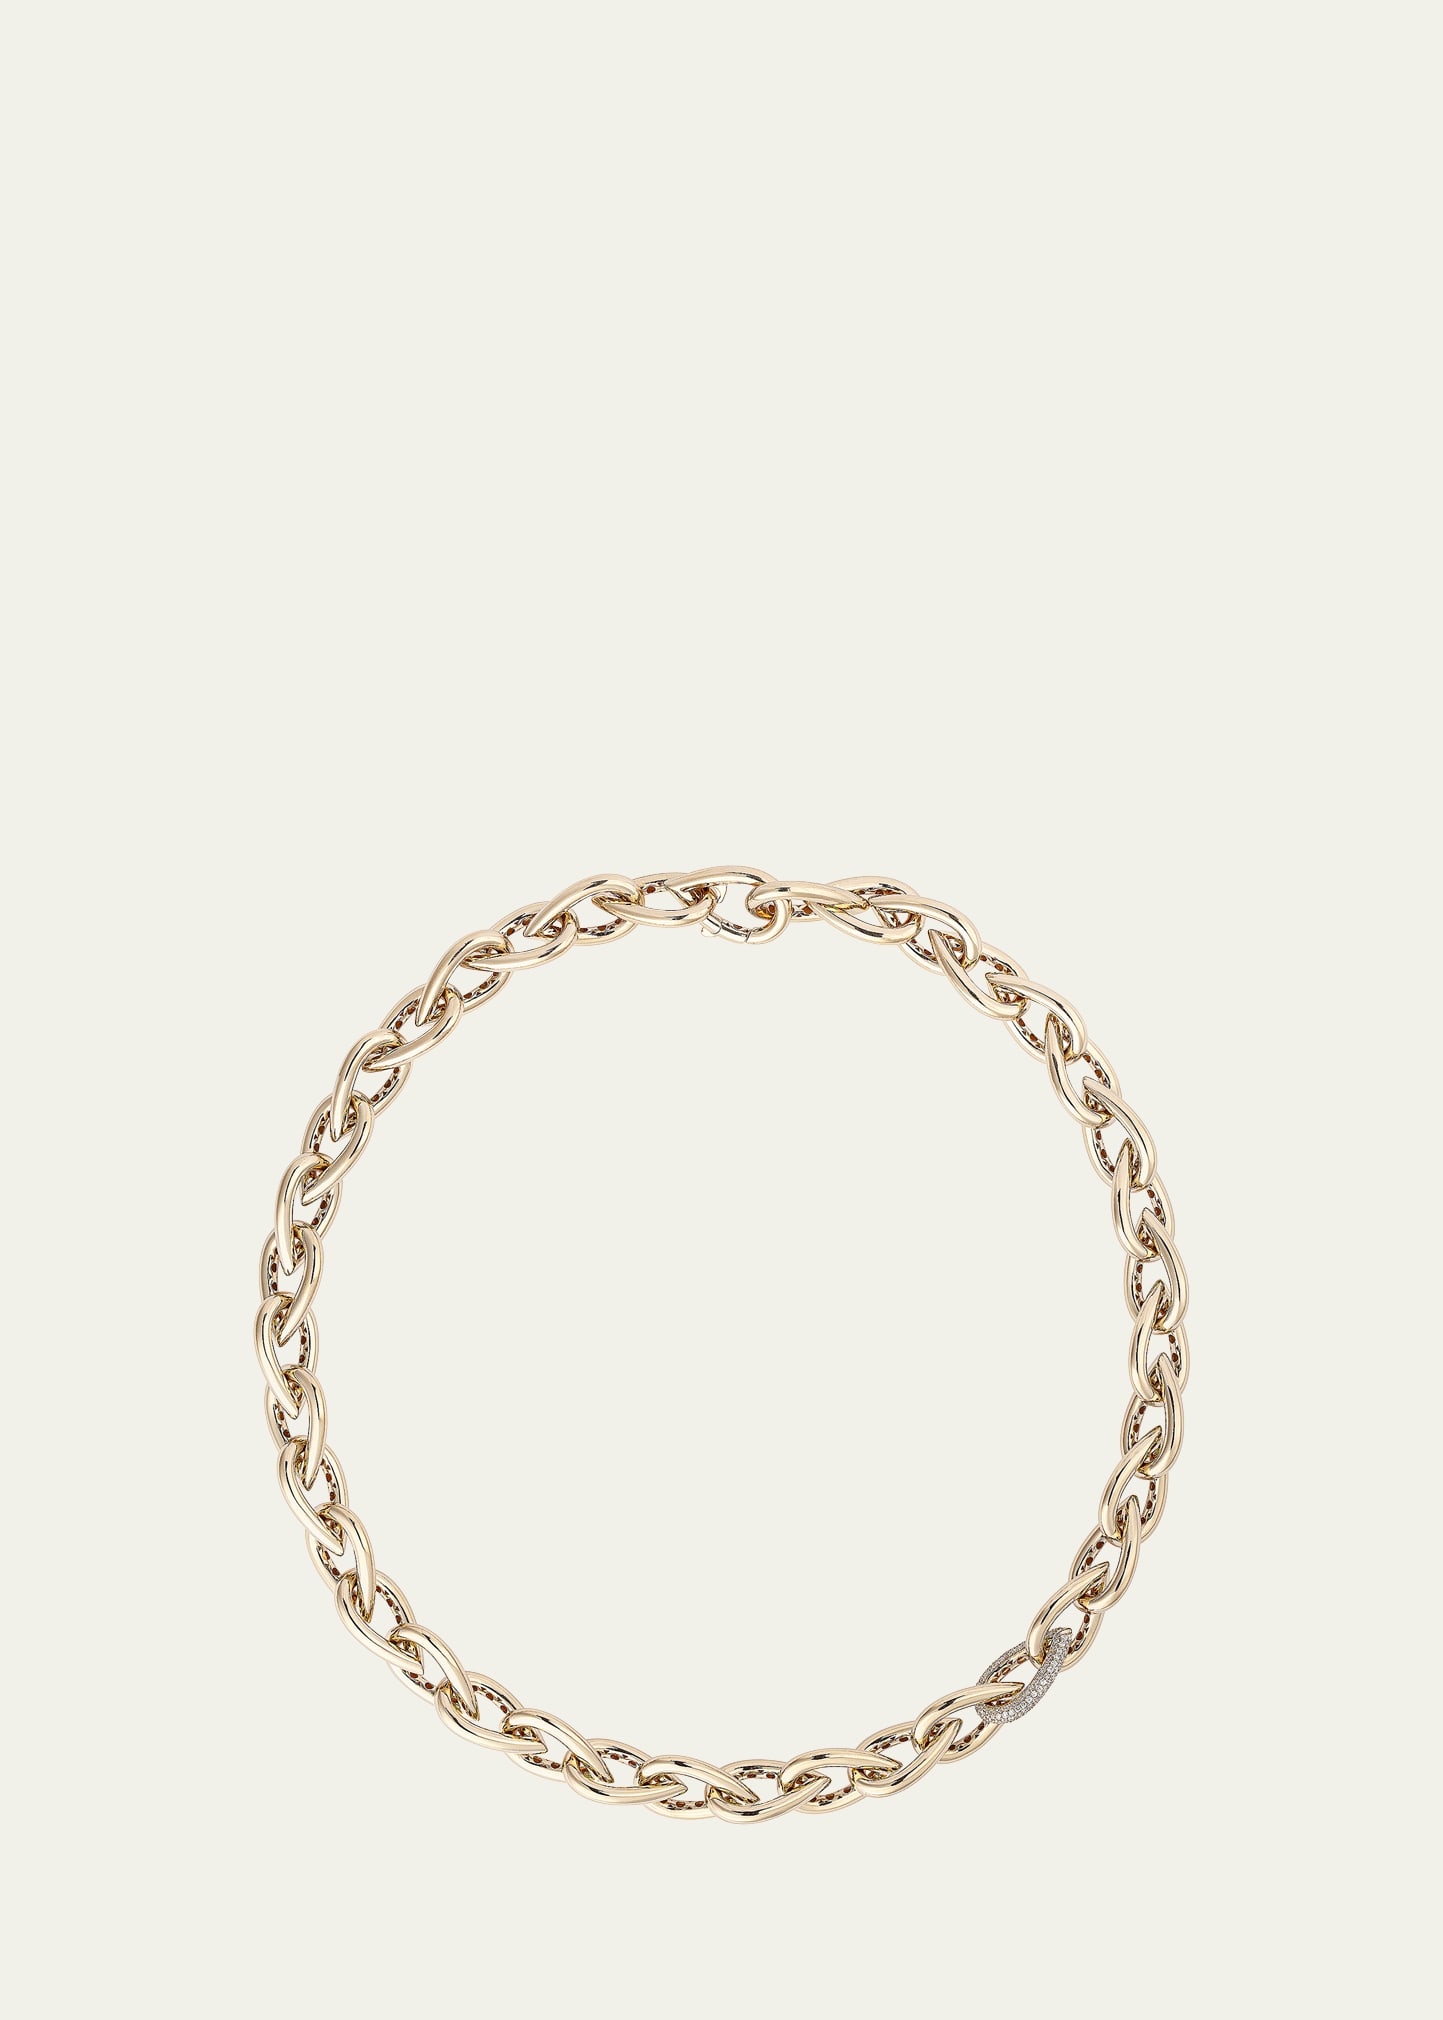 Drop Link Necklace in yellow Gold and White Diamonds